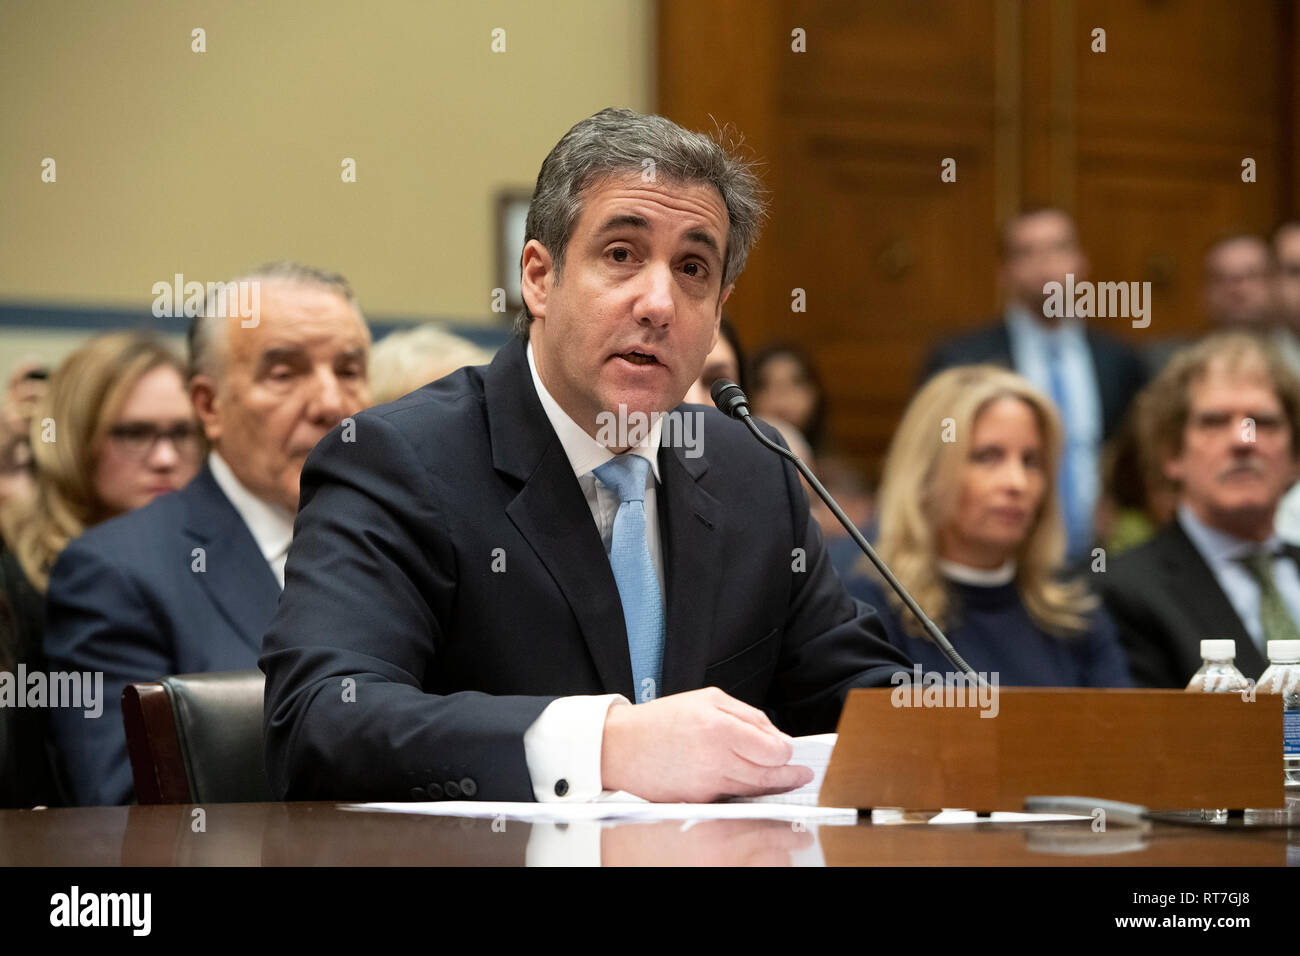 Washington, United States Of America. 27th Feb, 2019. Michael Cohen, Former attorney to United States President Donald J. Trump, testifies before the US House Committee on Oversight and Reform on Capitol Hill in Washington, DC on Wednesday, February 27, 2019. Credit: Ron Sachs/CNP (RESTRICTION: NO New York or New Jersey Newspapers or newspapers within a 75 mile radius of New York City) Photo via Credit: Newscom/Alamy Live News Stock Photo